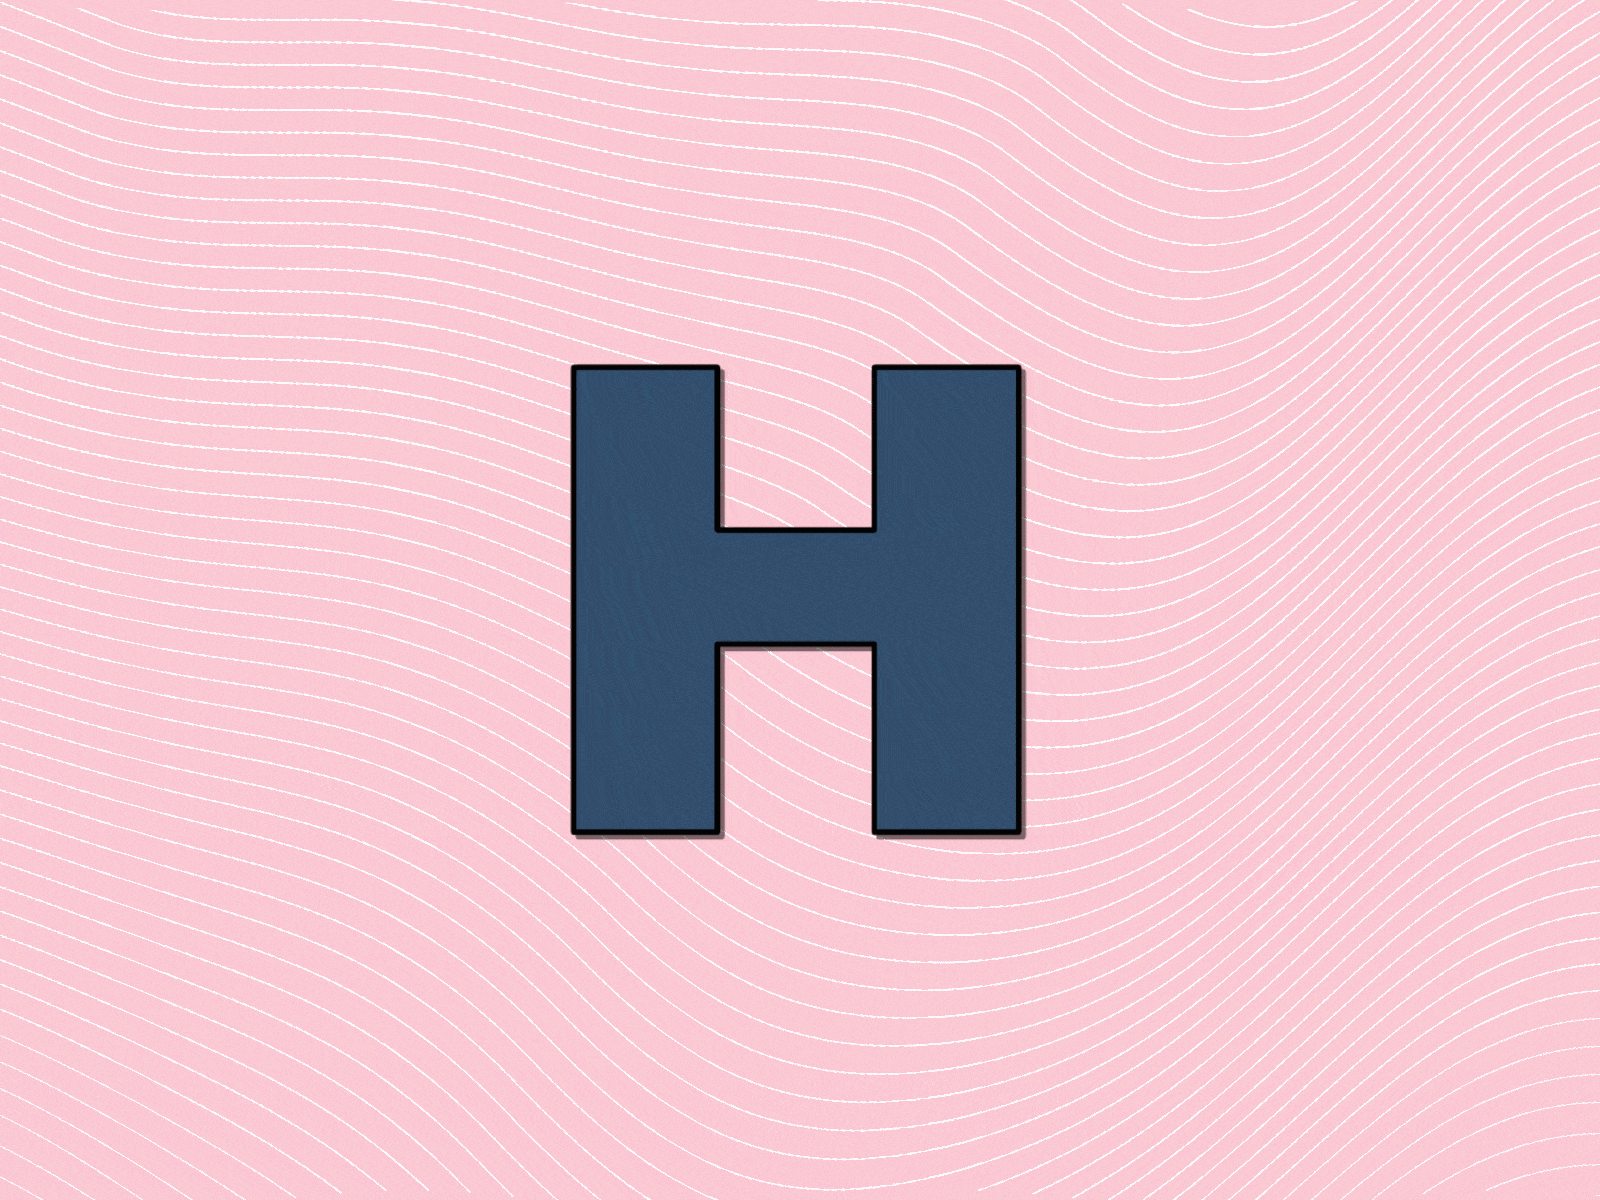 H for?